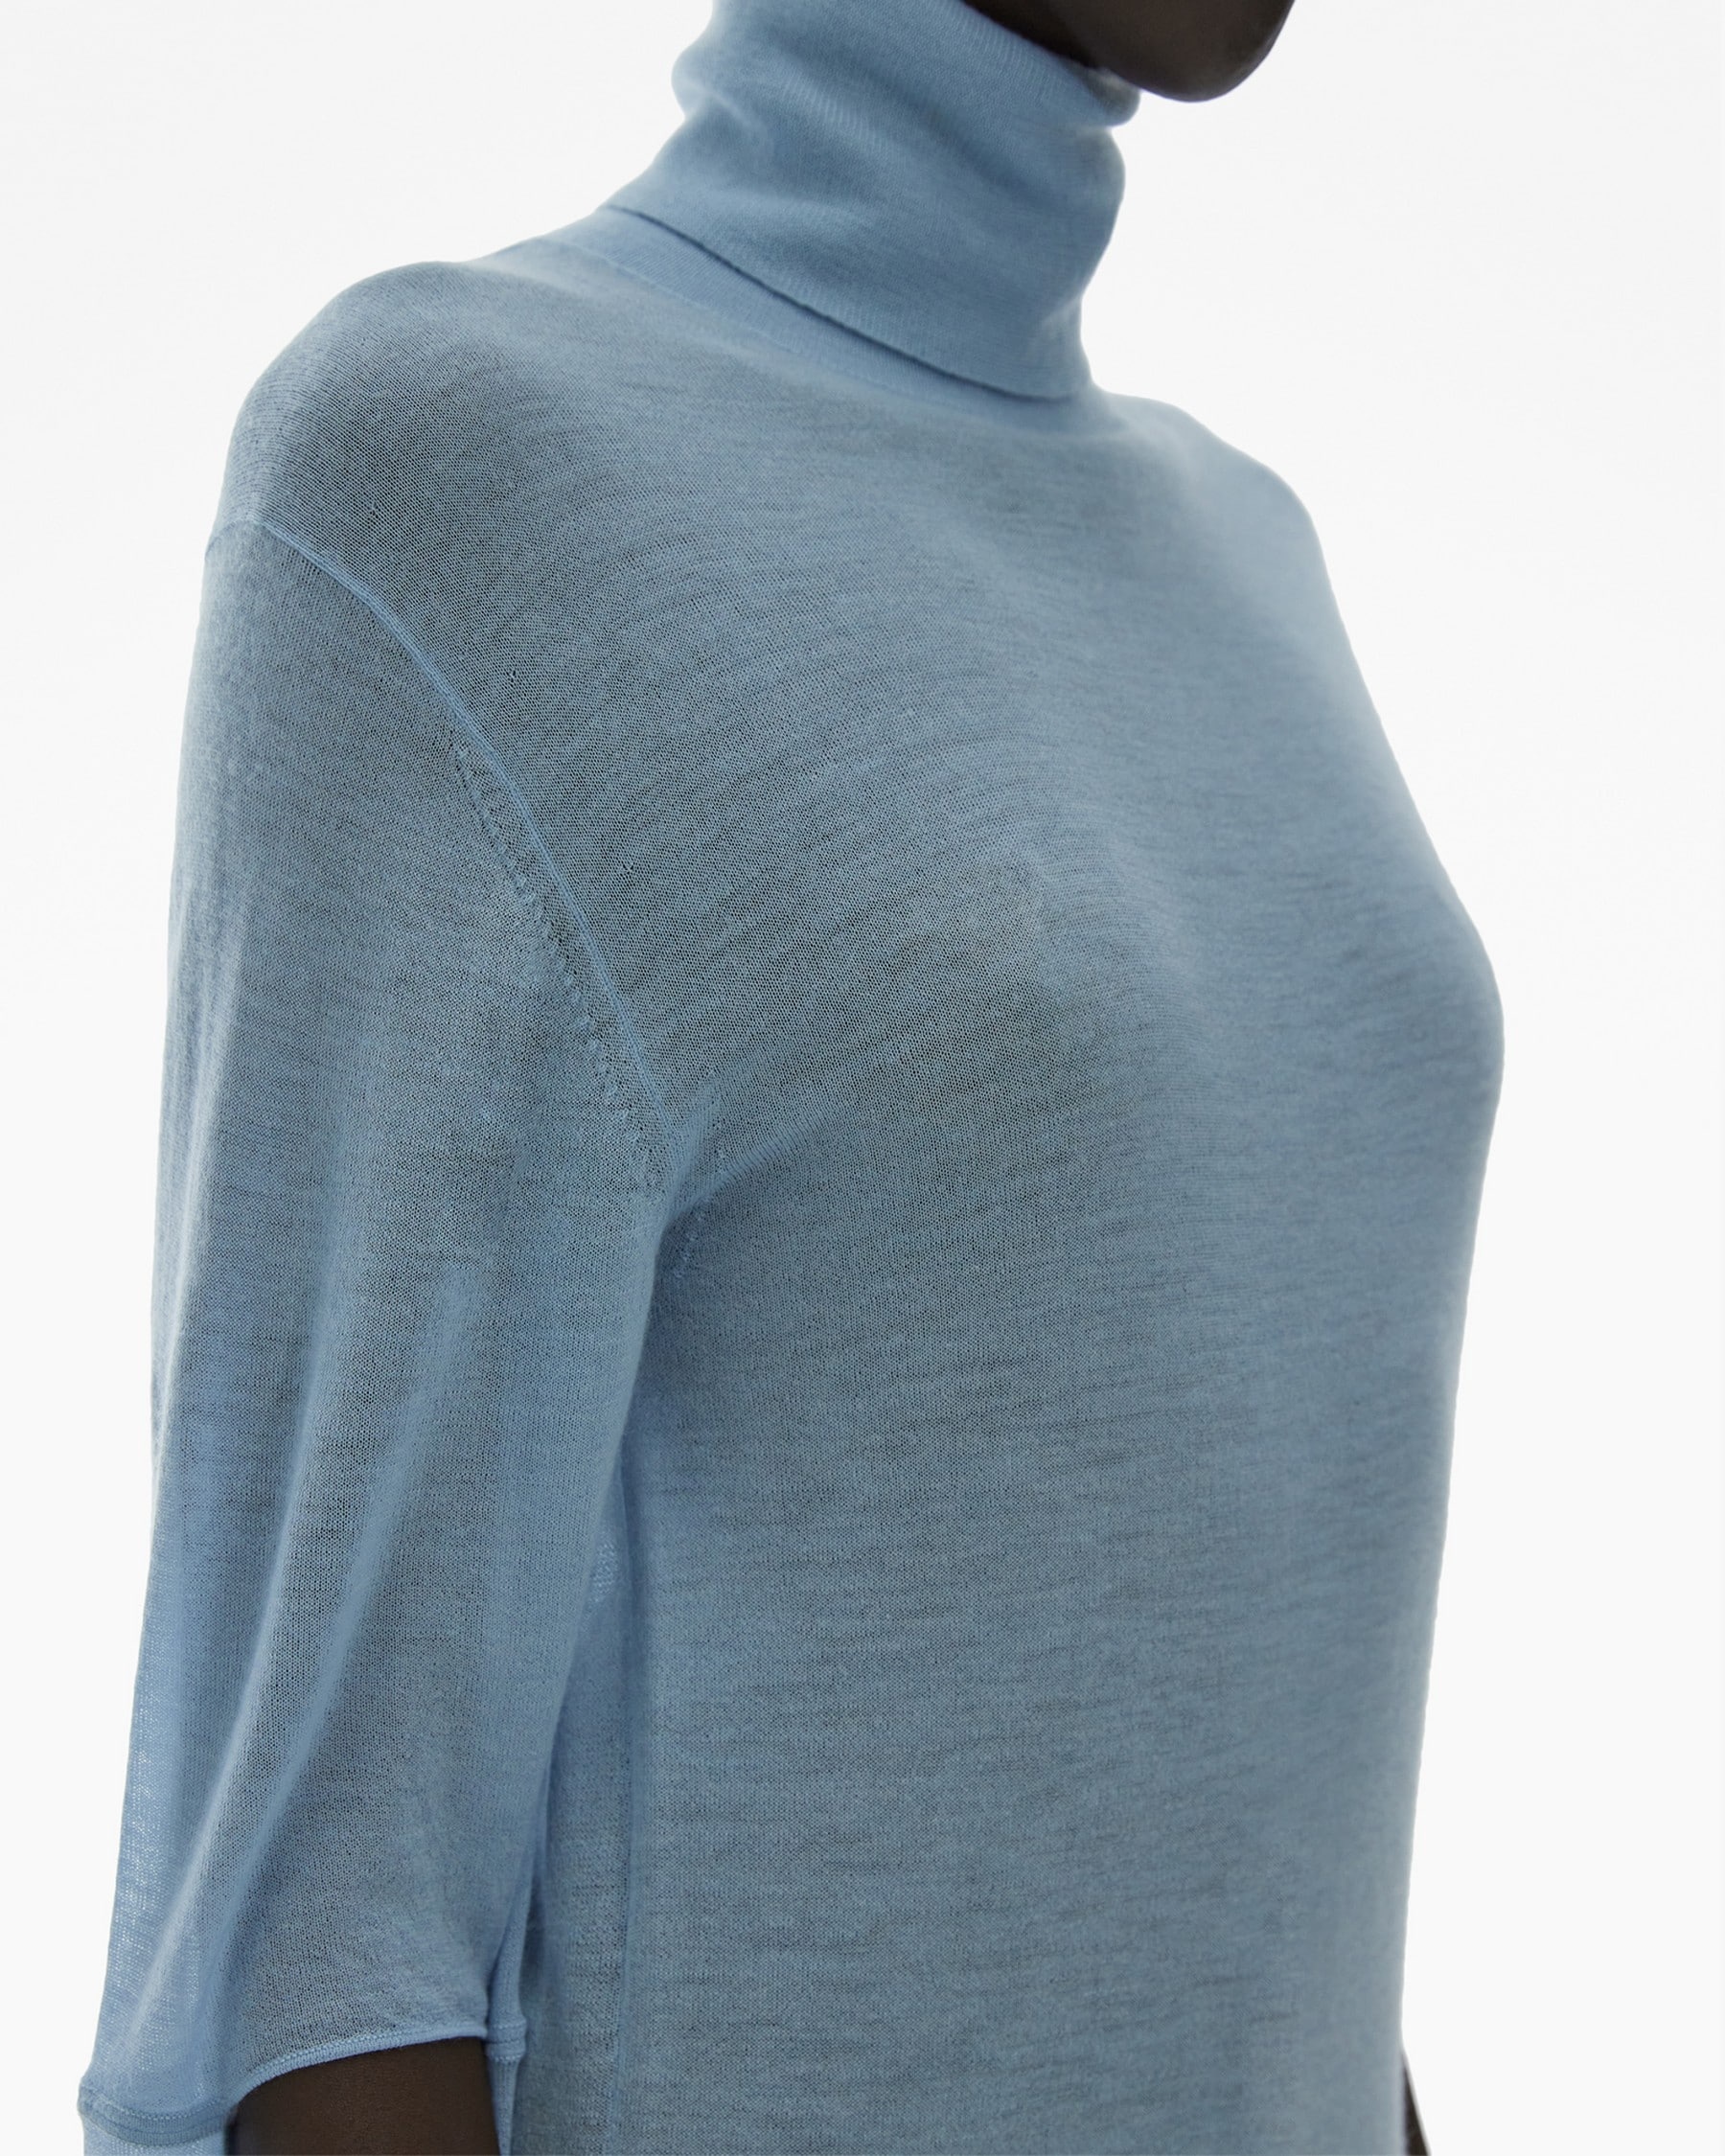 CUT-OUT TURTLENECK SWEATER - 6